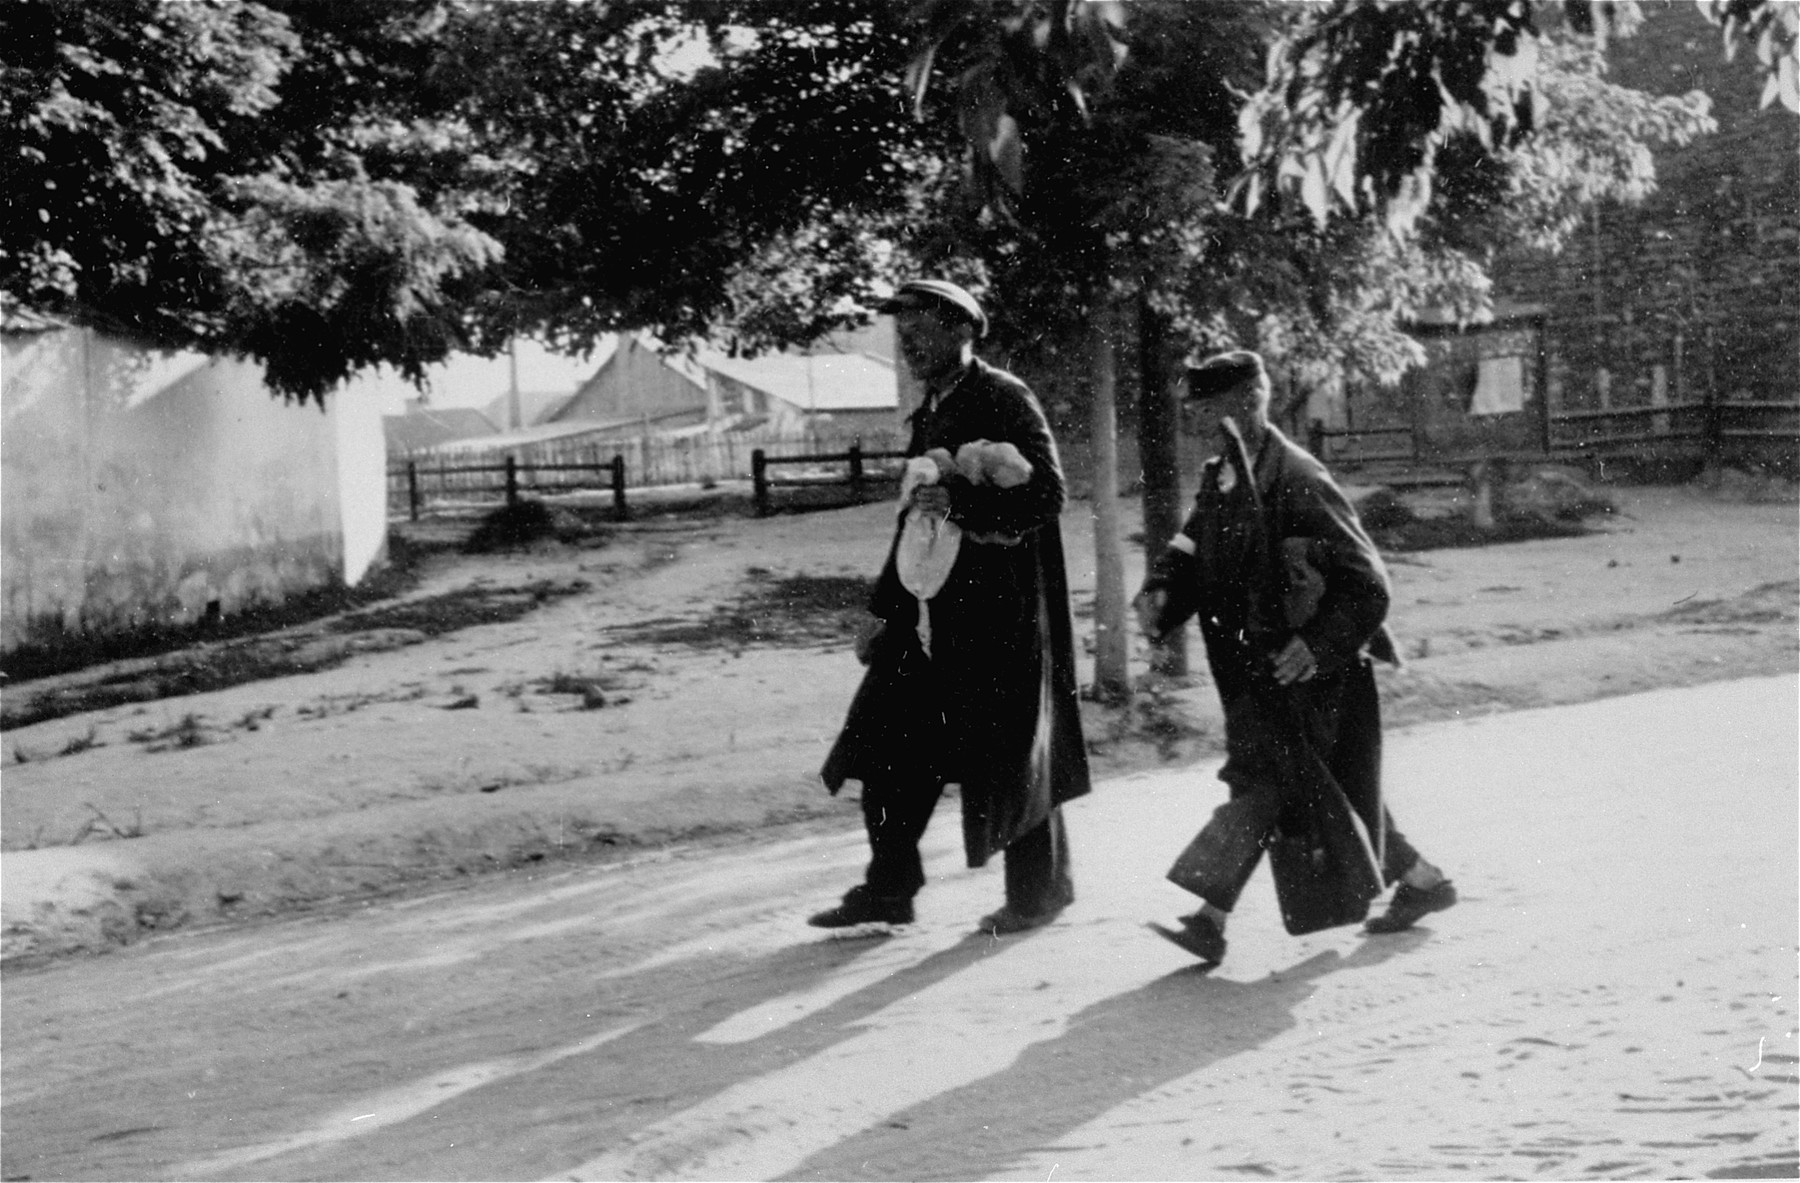 Two Jewish men who have been conscripted for forced labor, walk along an unpaved road in Konskowola.  One of them carries a shovel.